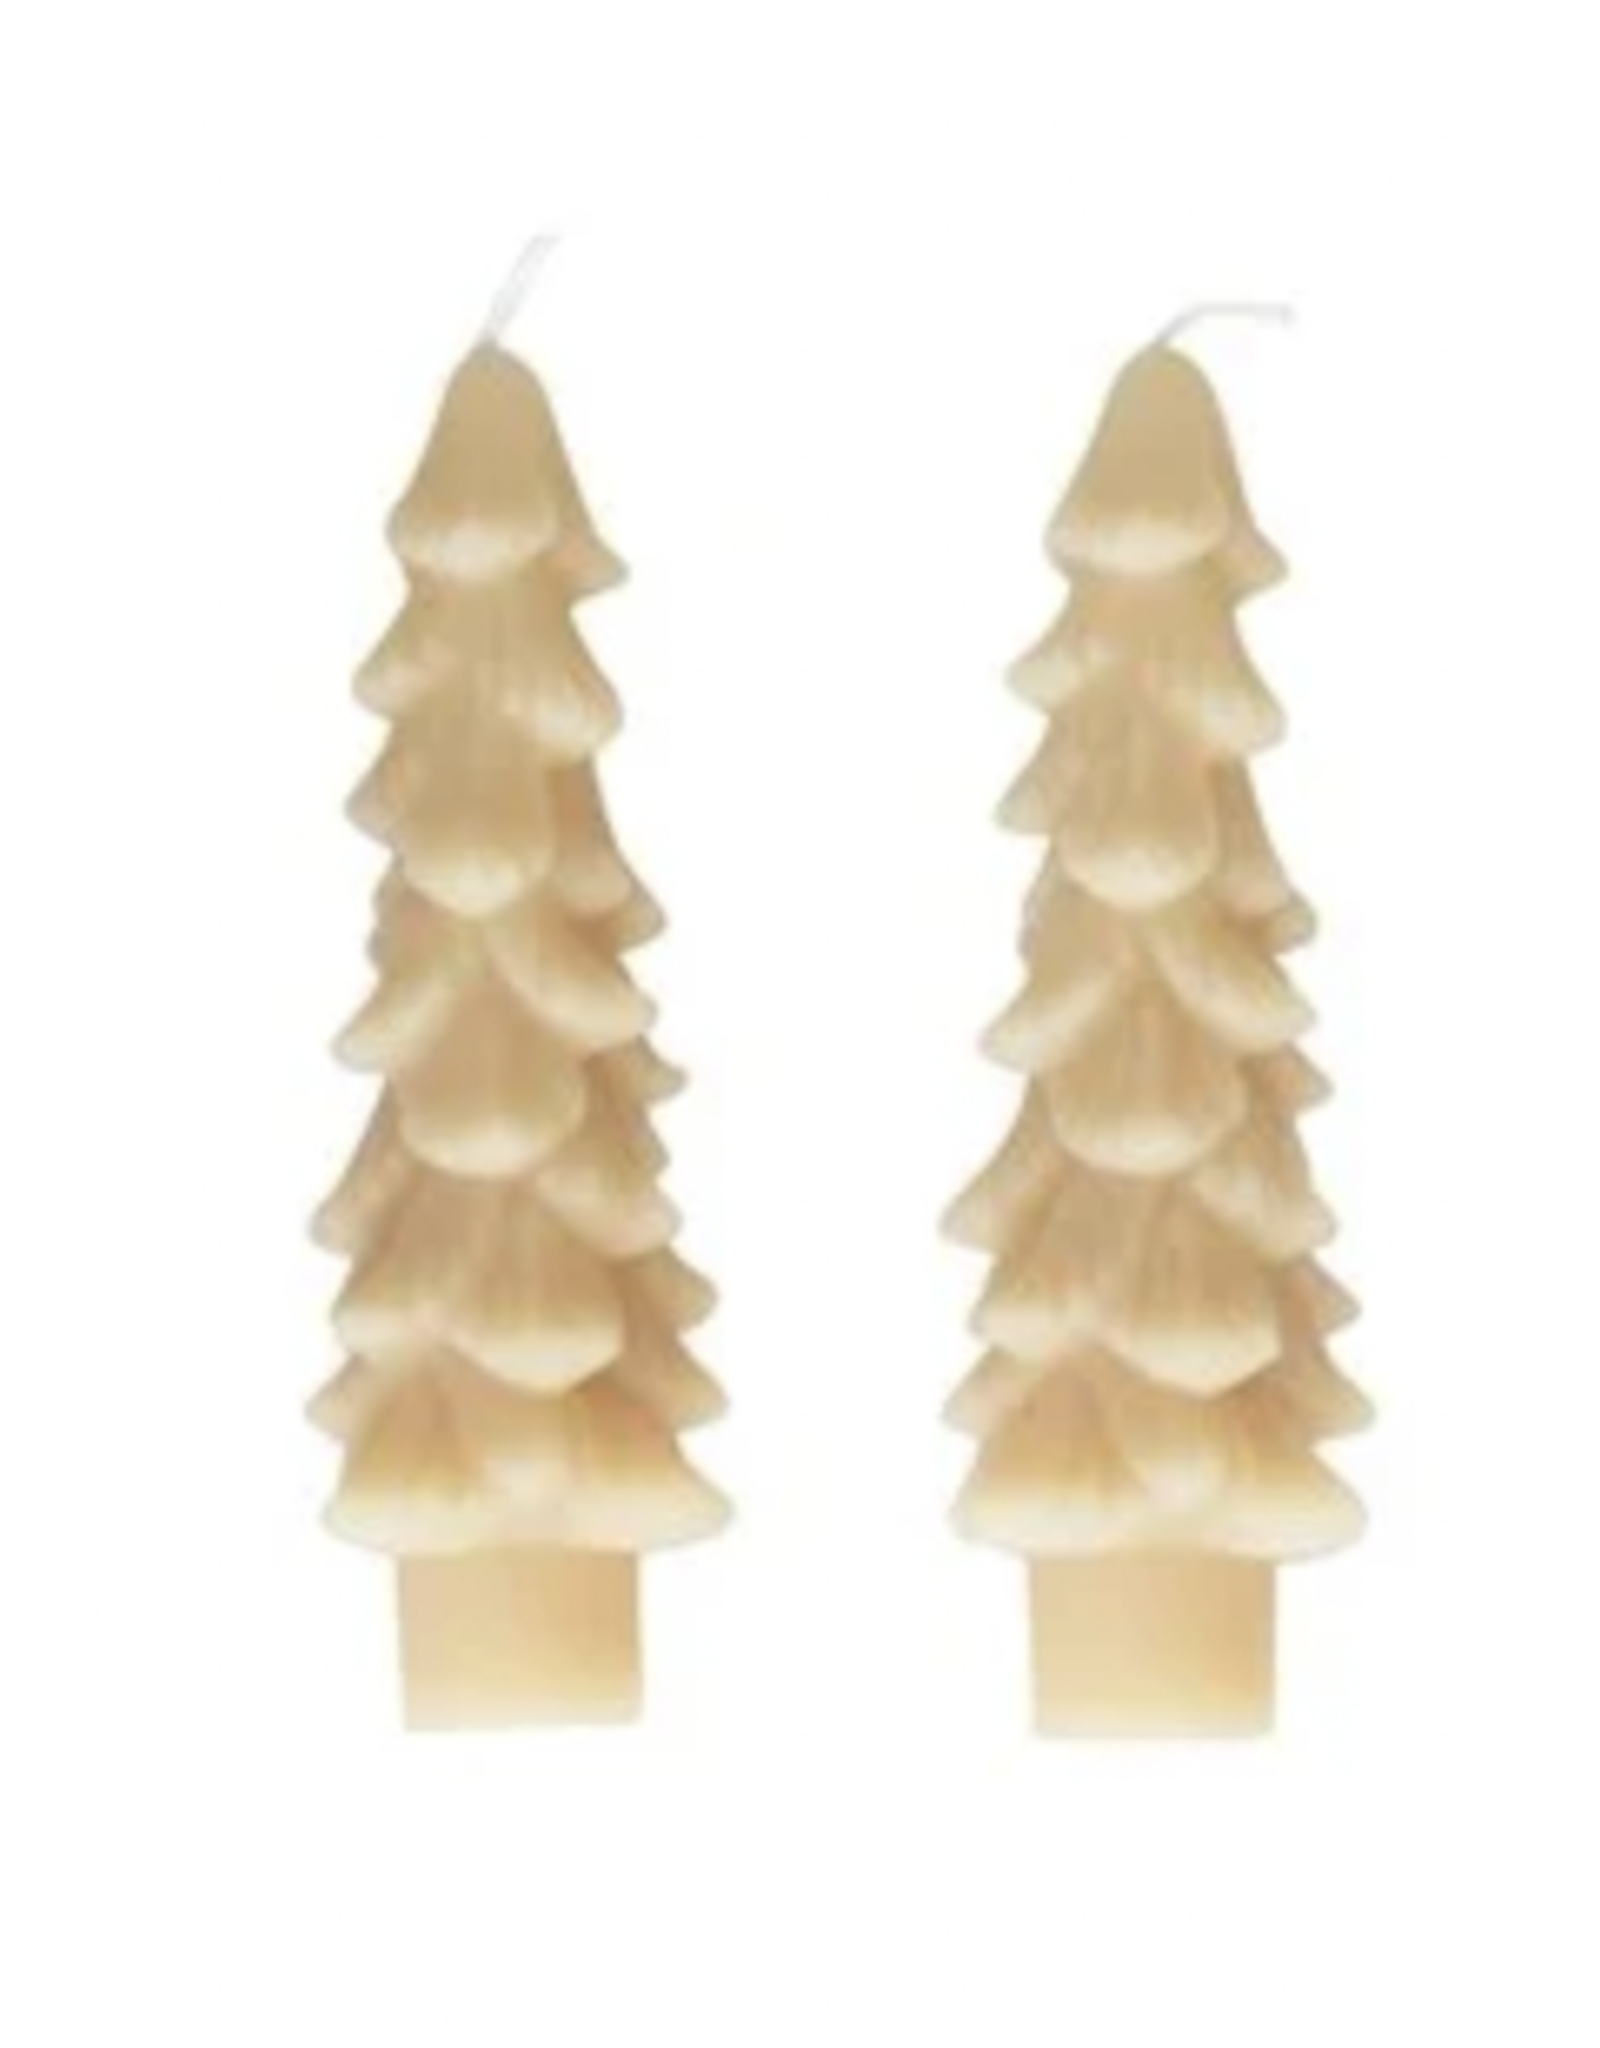 Creative Co-Op Unscented Tree Shaped Candle, 5"